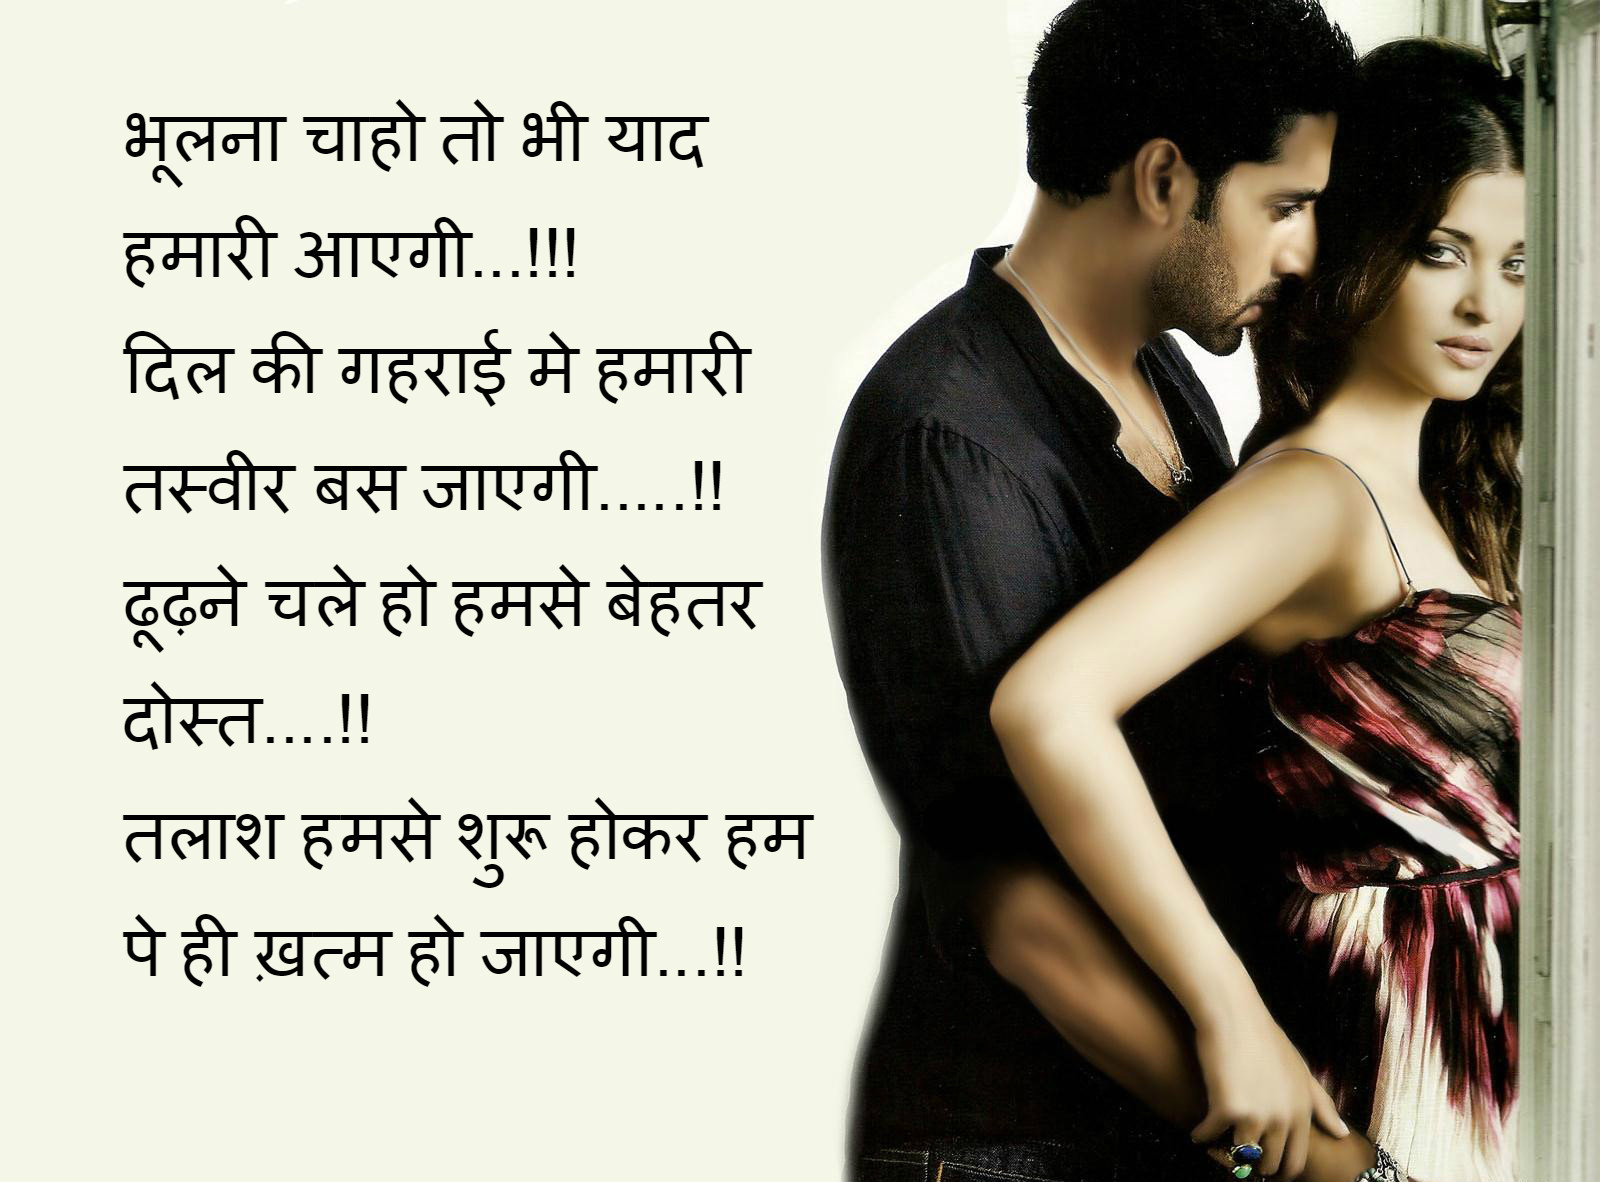 15 Hot Love Quotes In Hindi | Love quotes collection within HD images